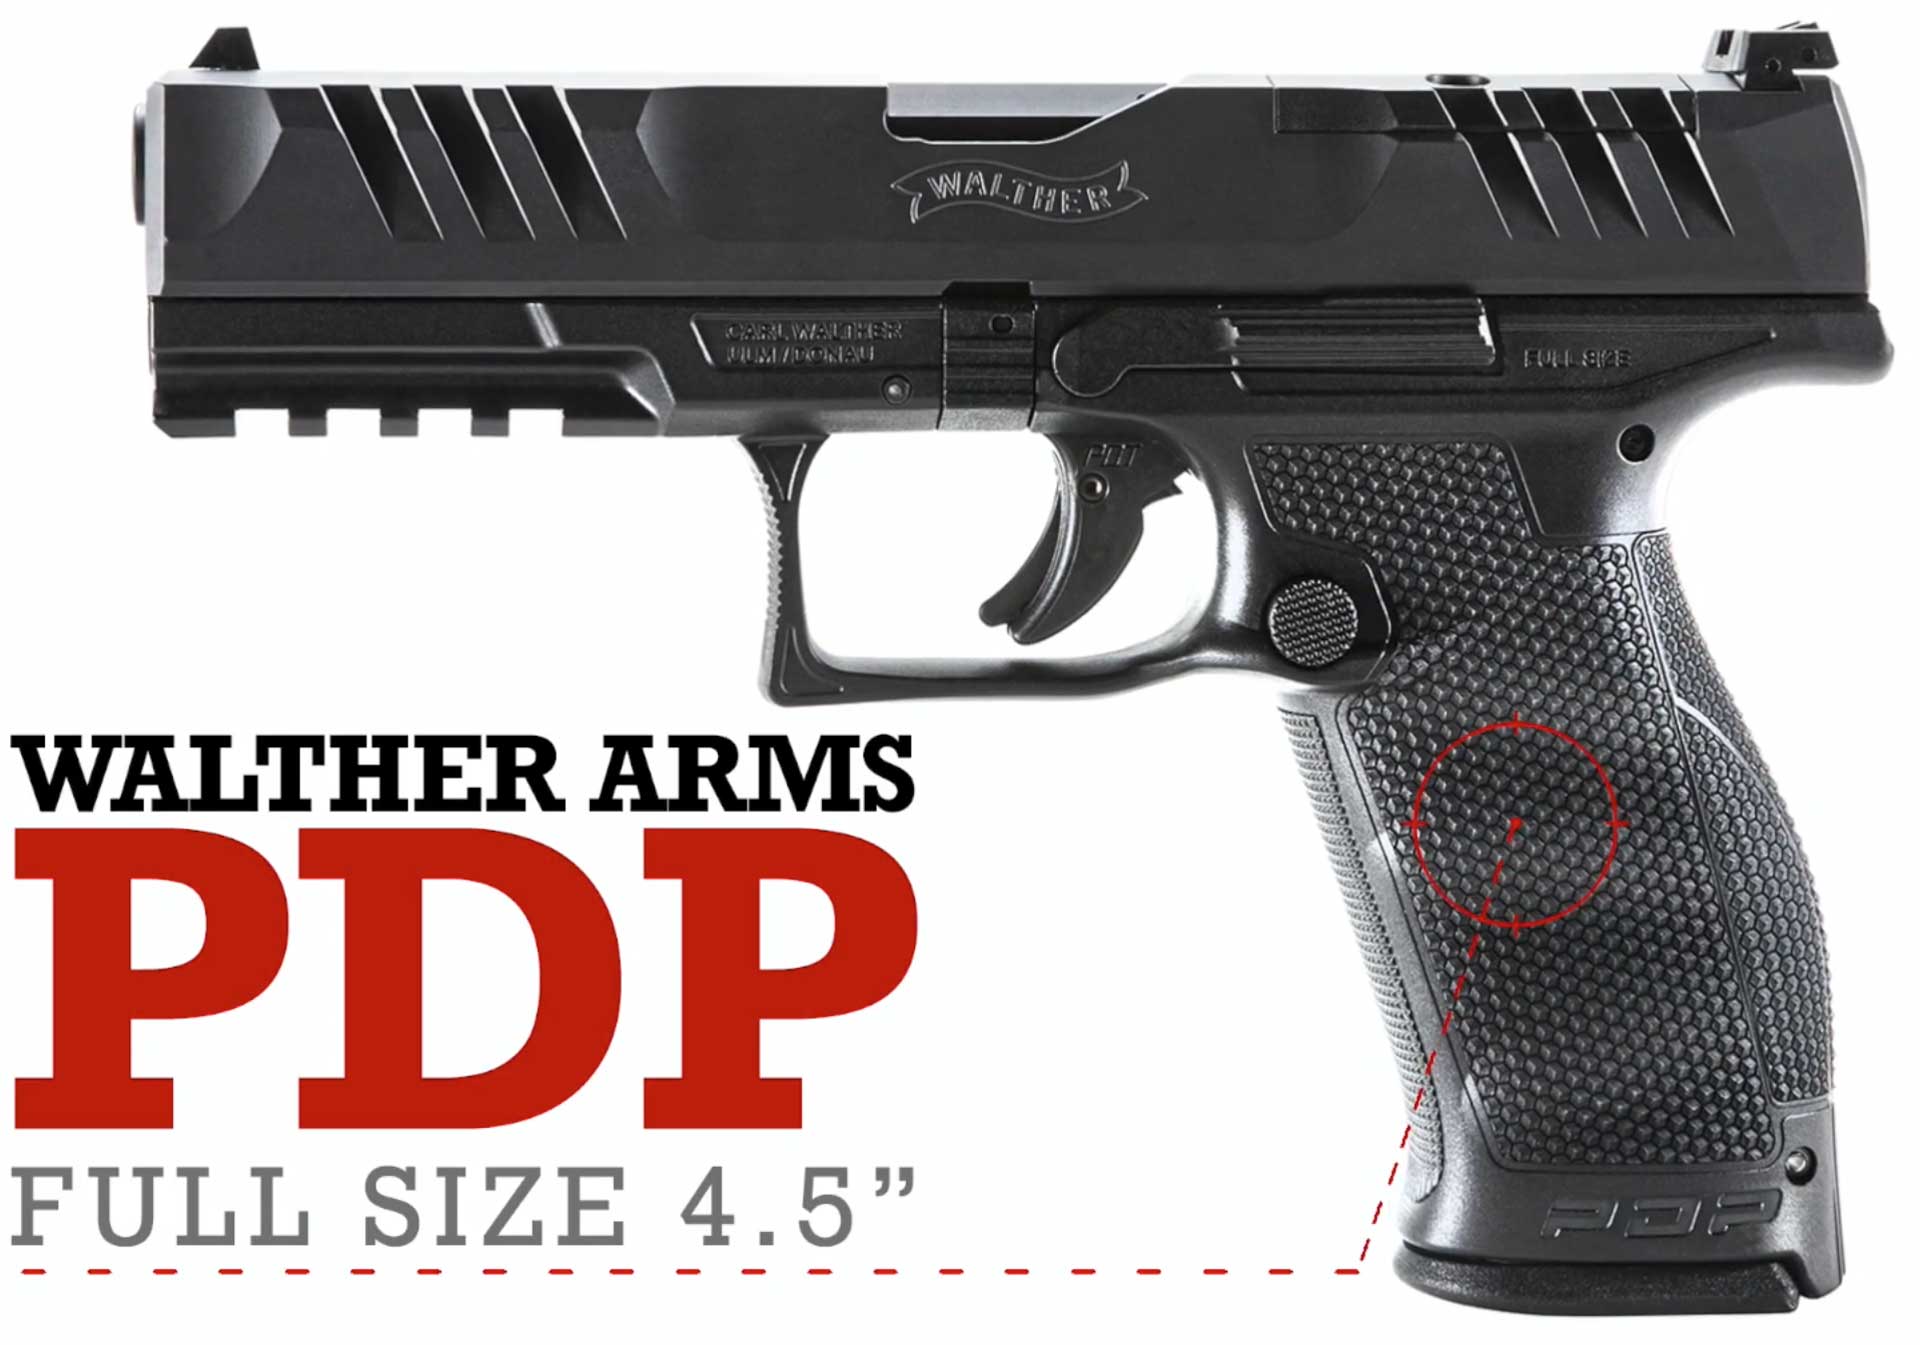 black pistol handgun metal plastic gun left side with text noting make and model "walther arms pdp full size 4.5""